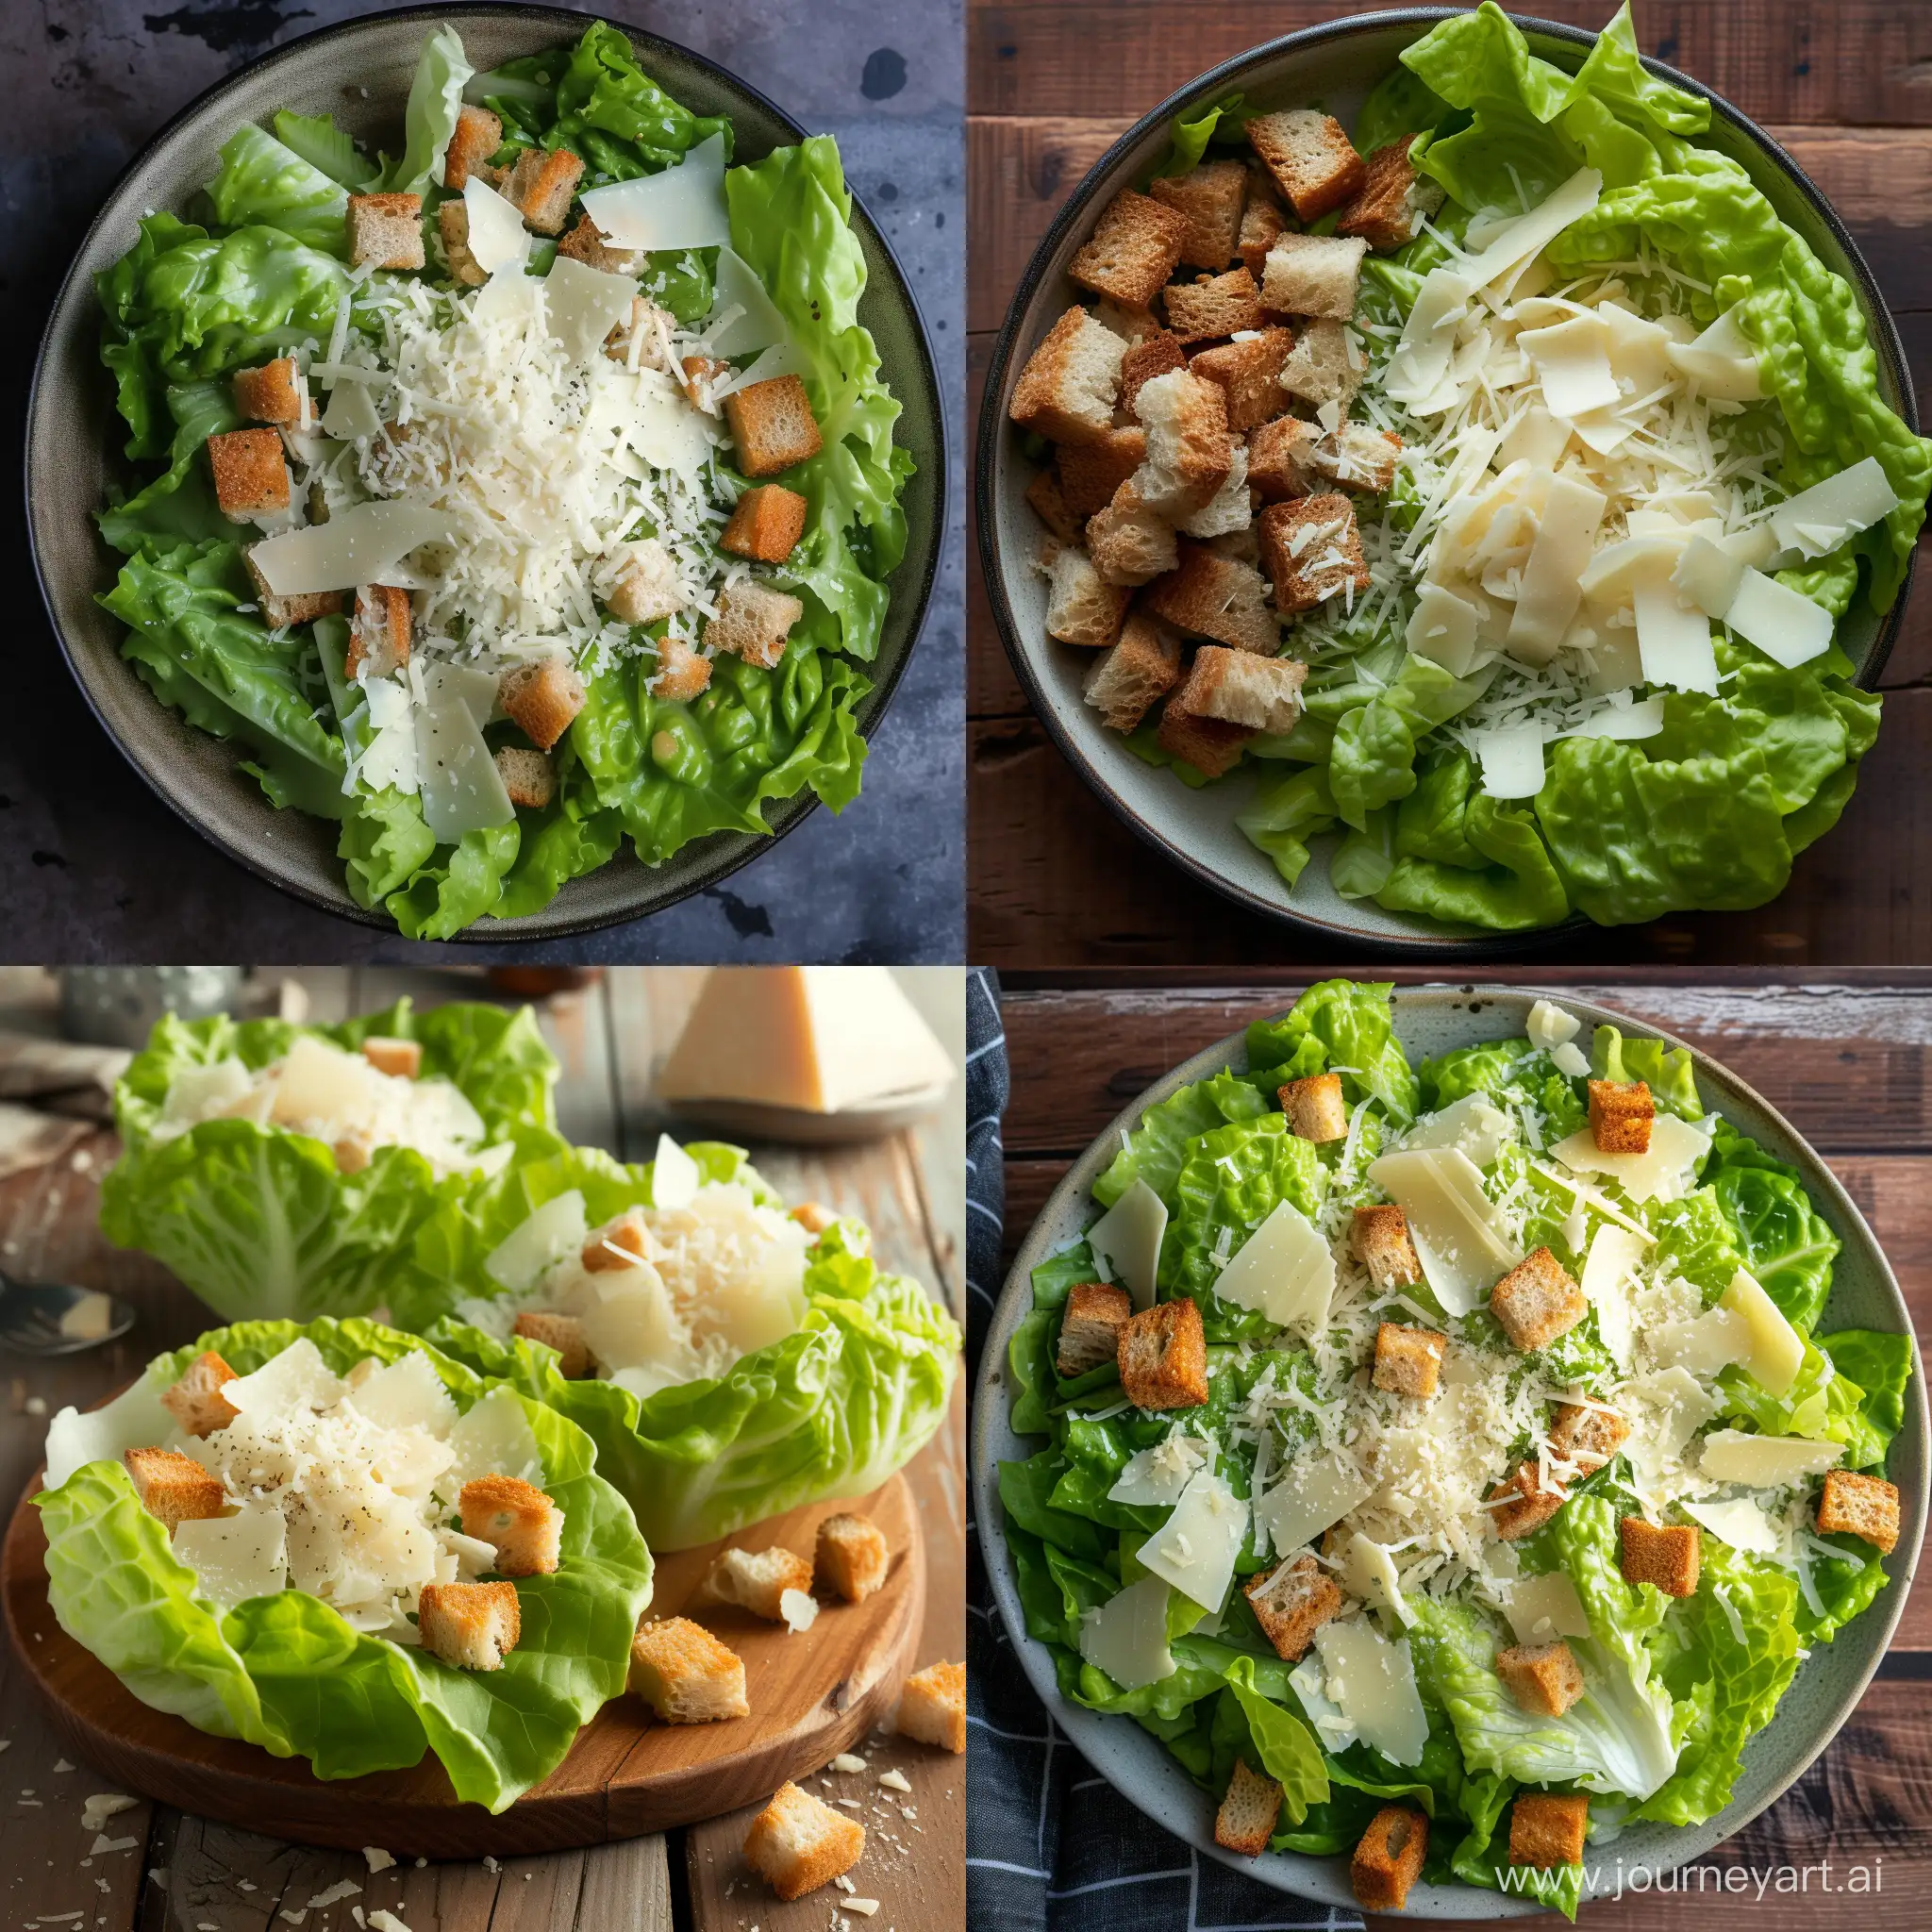 Baby gem lettuce, croutons, grated Italian cheese 